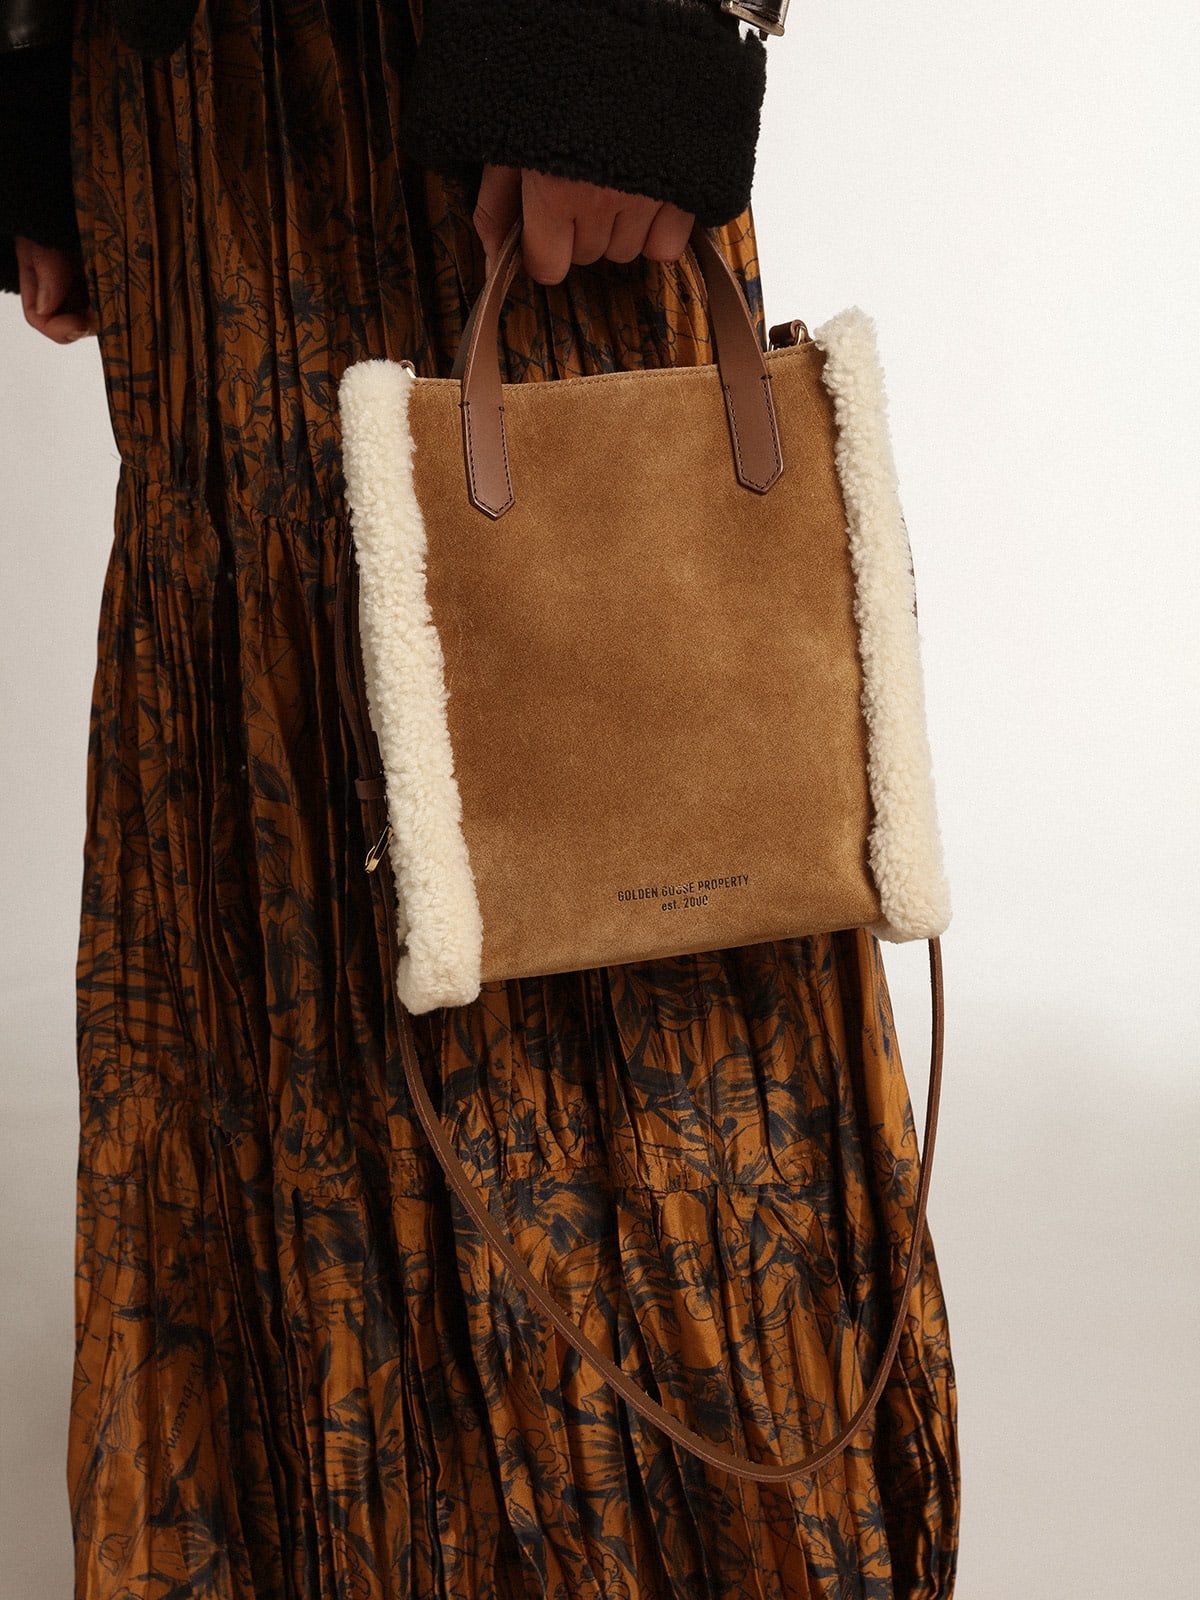 Mini California Bag in suede leather with shearling trim - 3